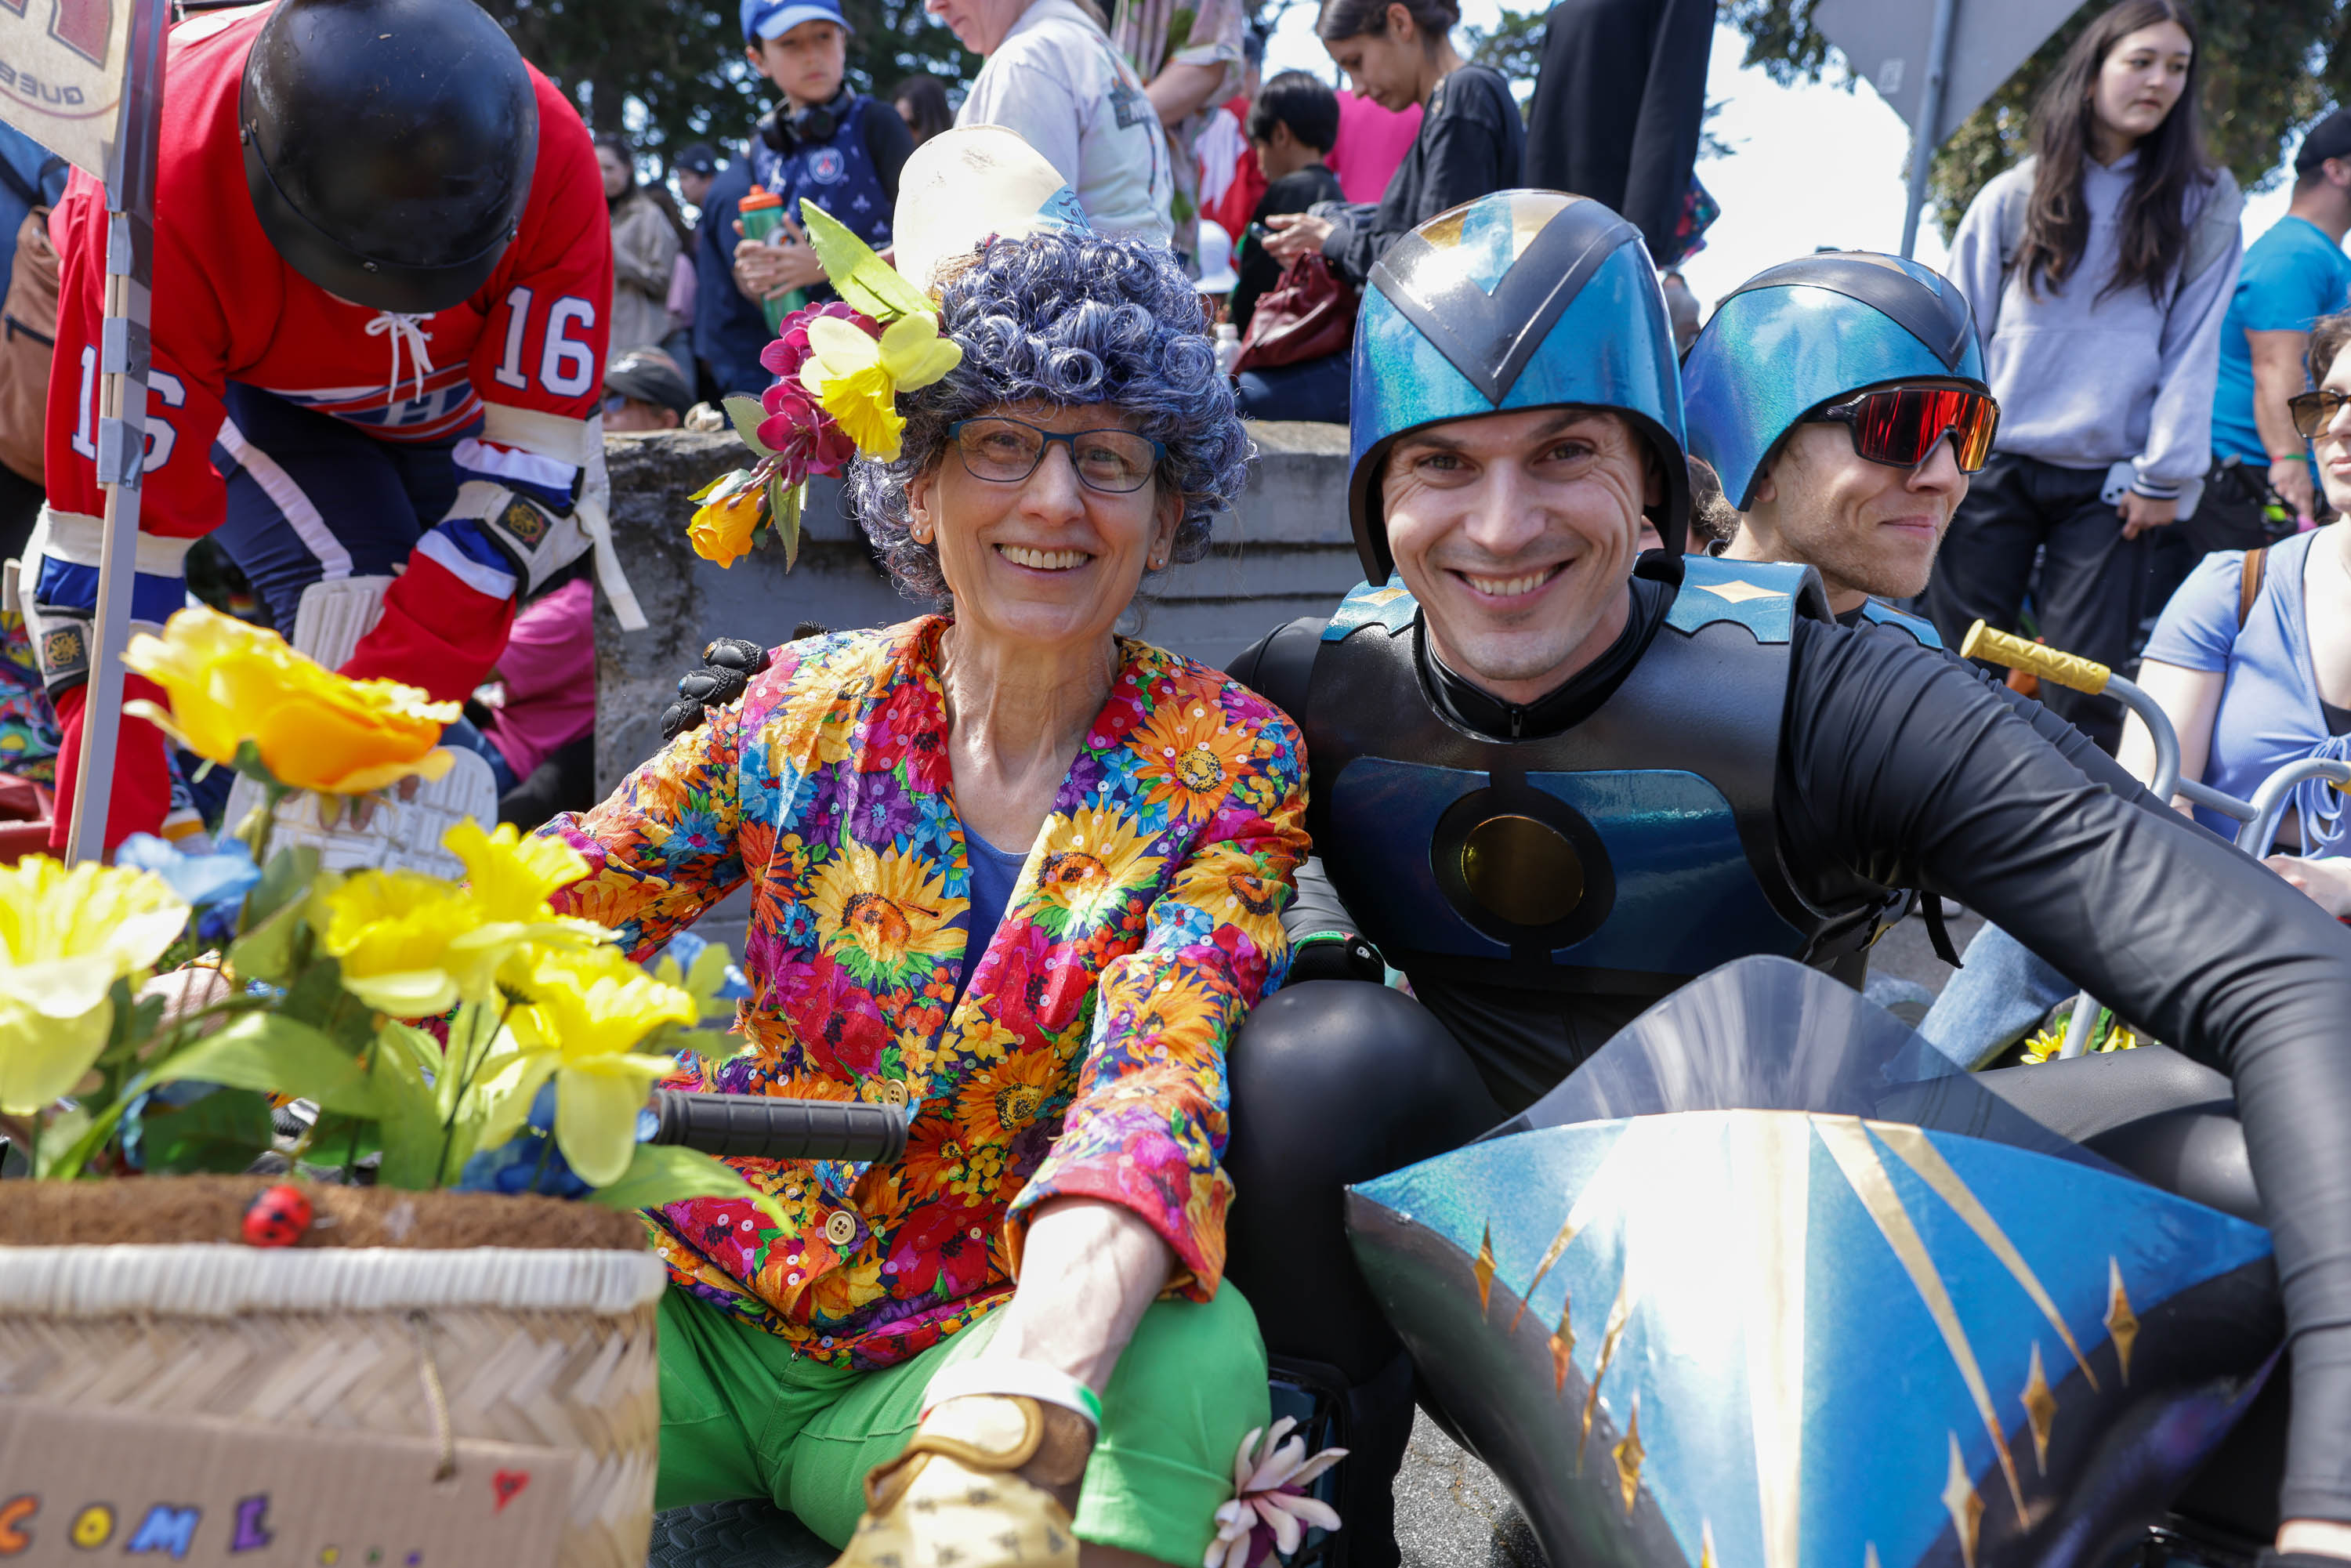 Two people in colorful costumes pose on a flower-adorned bicycle; one is dressed as a superhero, the other in a vibrant floral outfit.